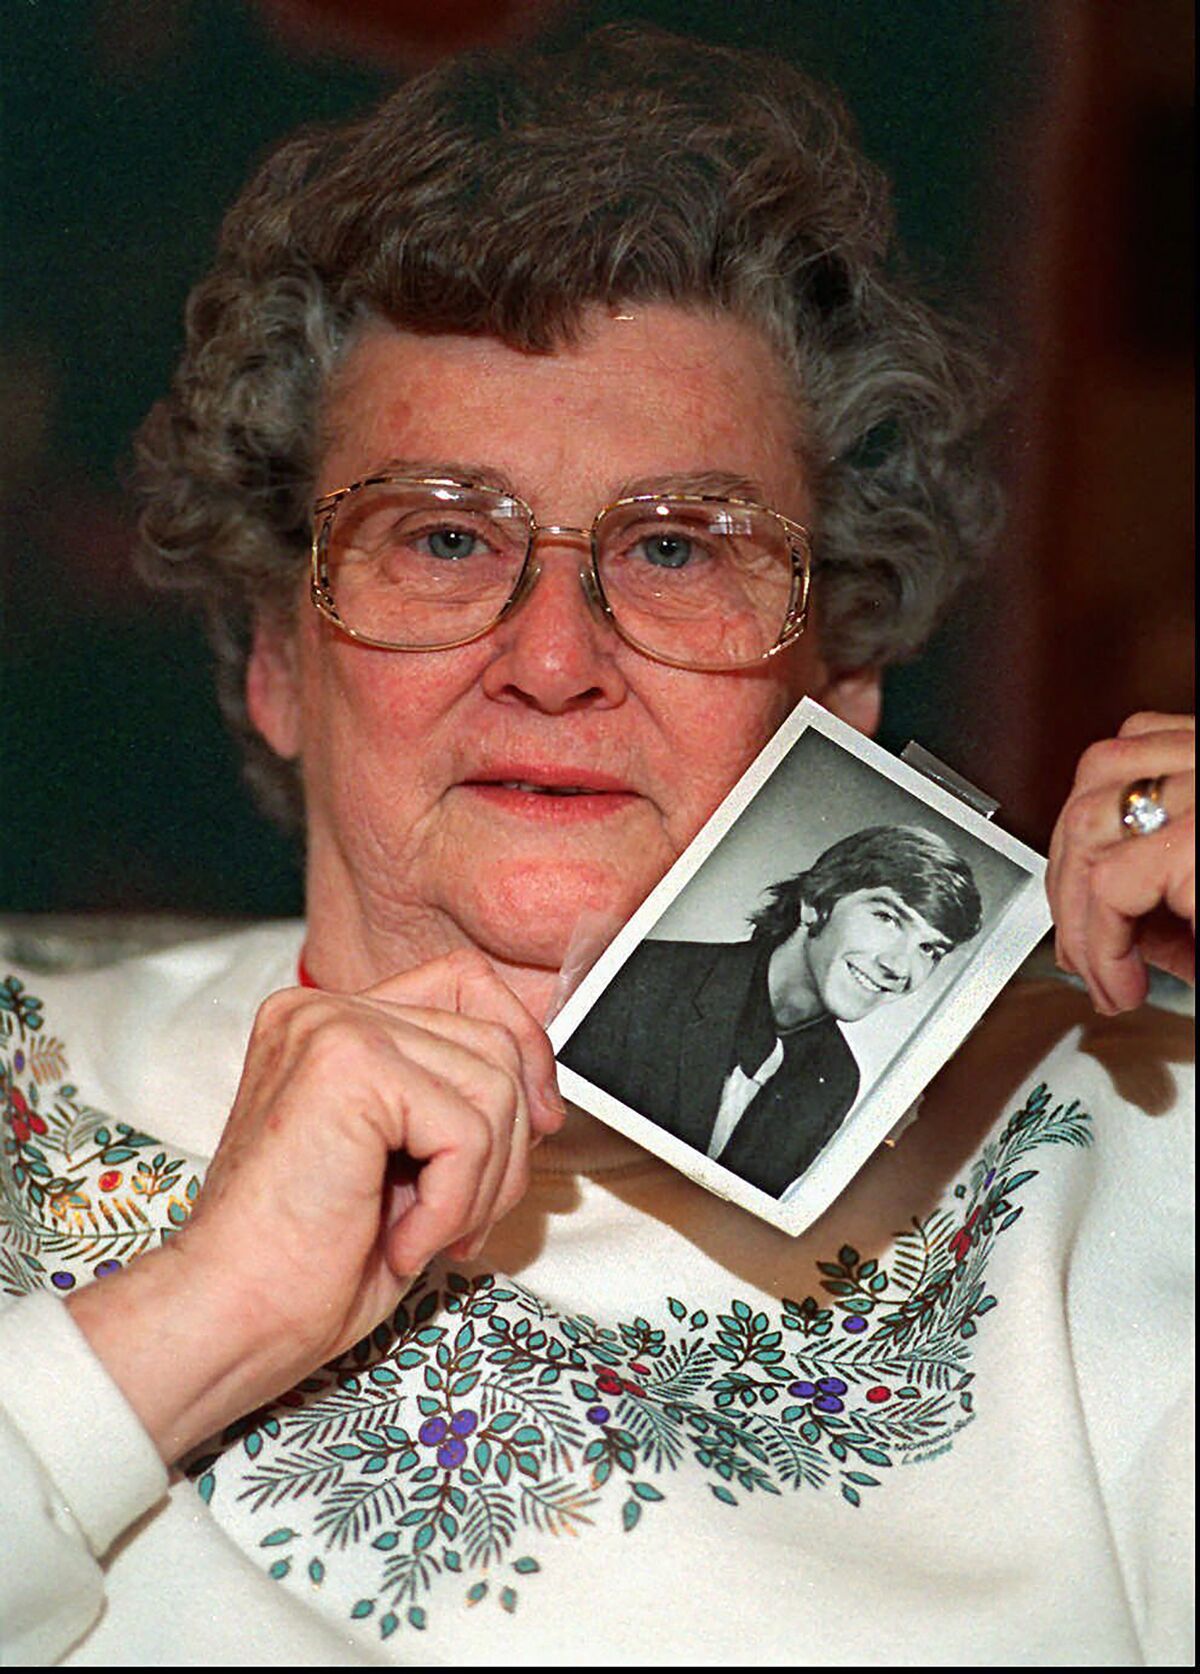 Louise Clinkscales holds a photo of her son Kyle Clinkscales at age 21 in this undated file photo. Investigators have discovered the 1974 Pinto a 22-year-old student was driving on his way back to Auburn University from Georgia when he disappeared more than 45 years ago, sheriff's officials announced Wednesday, Dec. 8, 2021. Kyle Clinkscales' car was pulled from a creek around Cusseta, Alabama, on Tuesday after a man called 911 to say he believed he had spotted a vehicle. (Renee Hannis/Atlanta Journal-Constitution via AP)